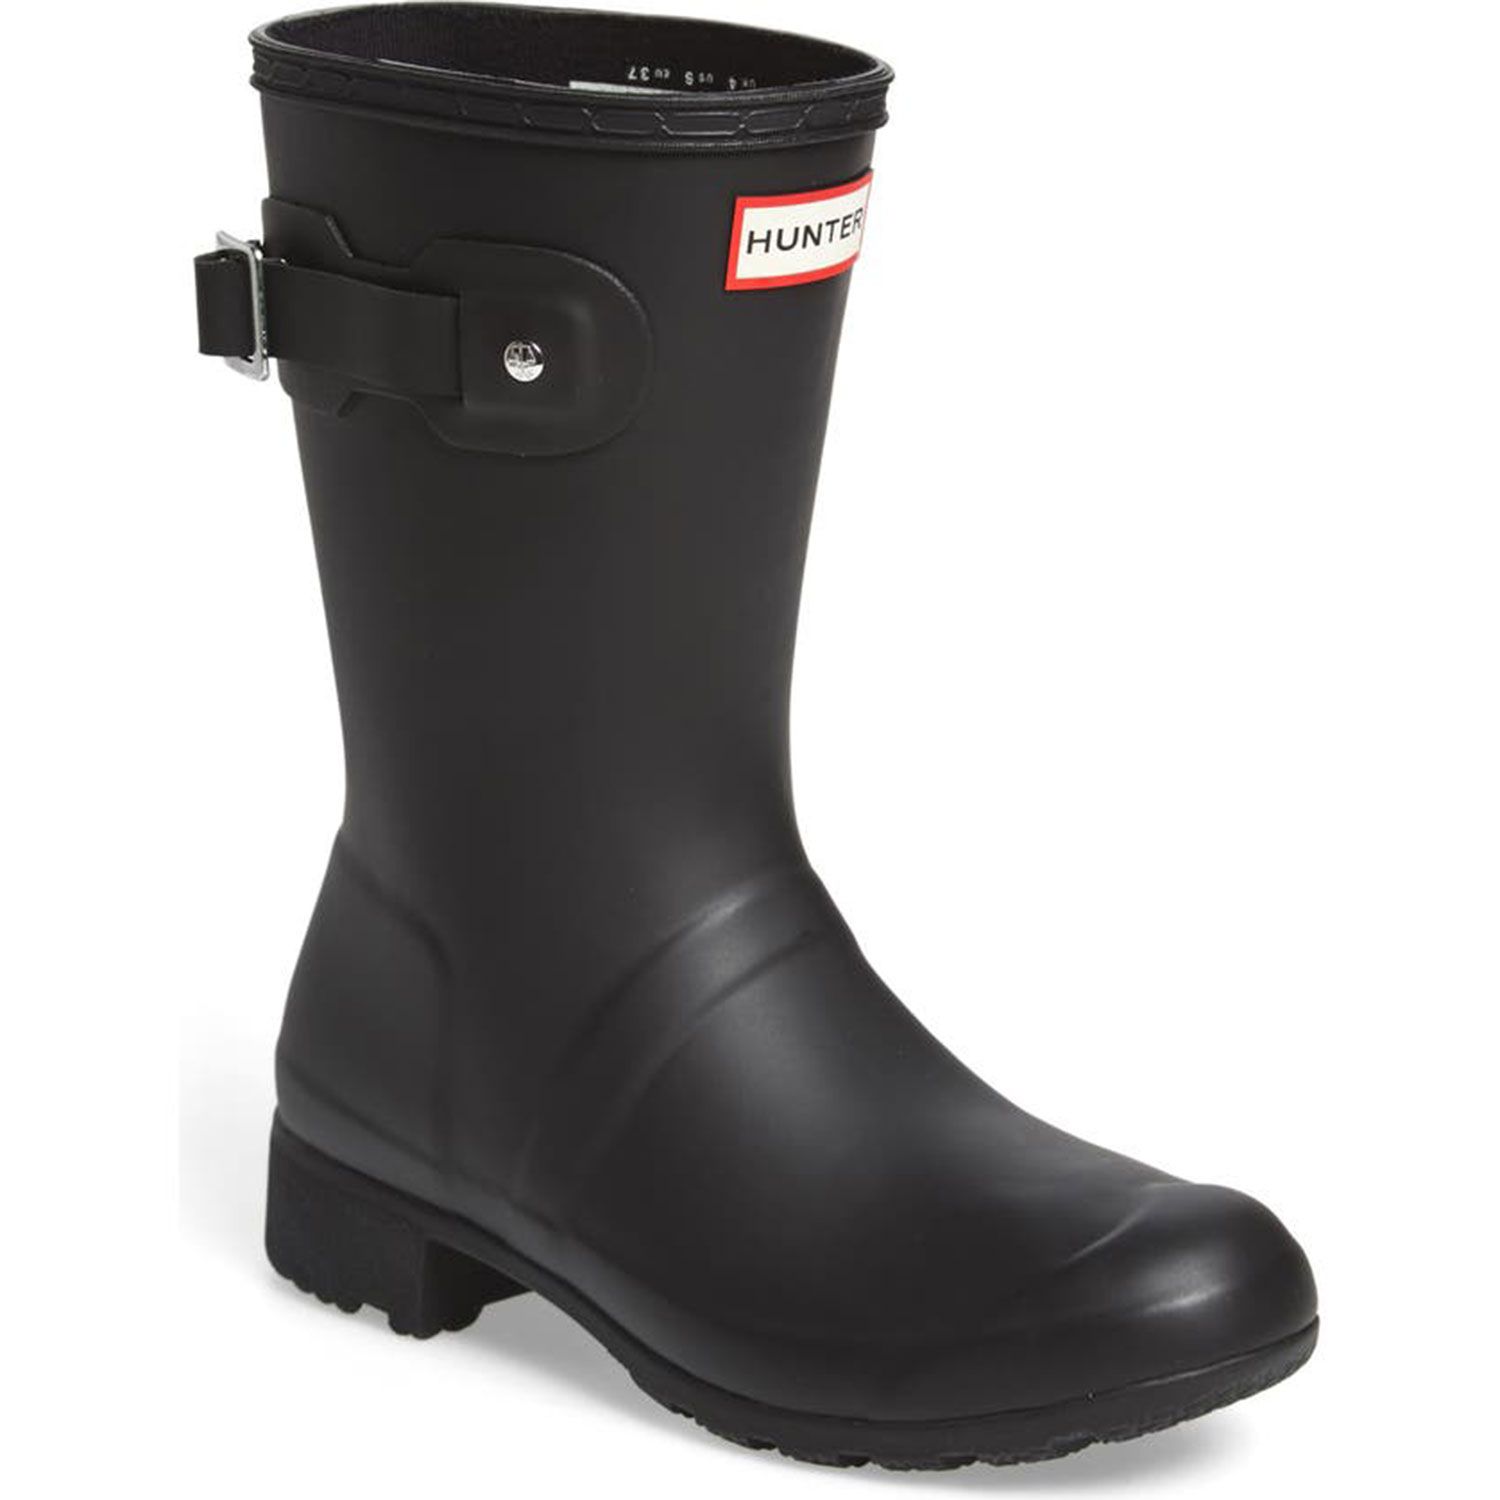 Shop Taylor Swift’s Hunter Boots for Under $150 at Nordstrom | PEOPLE.com